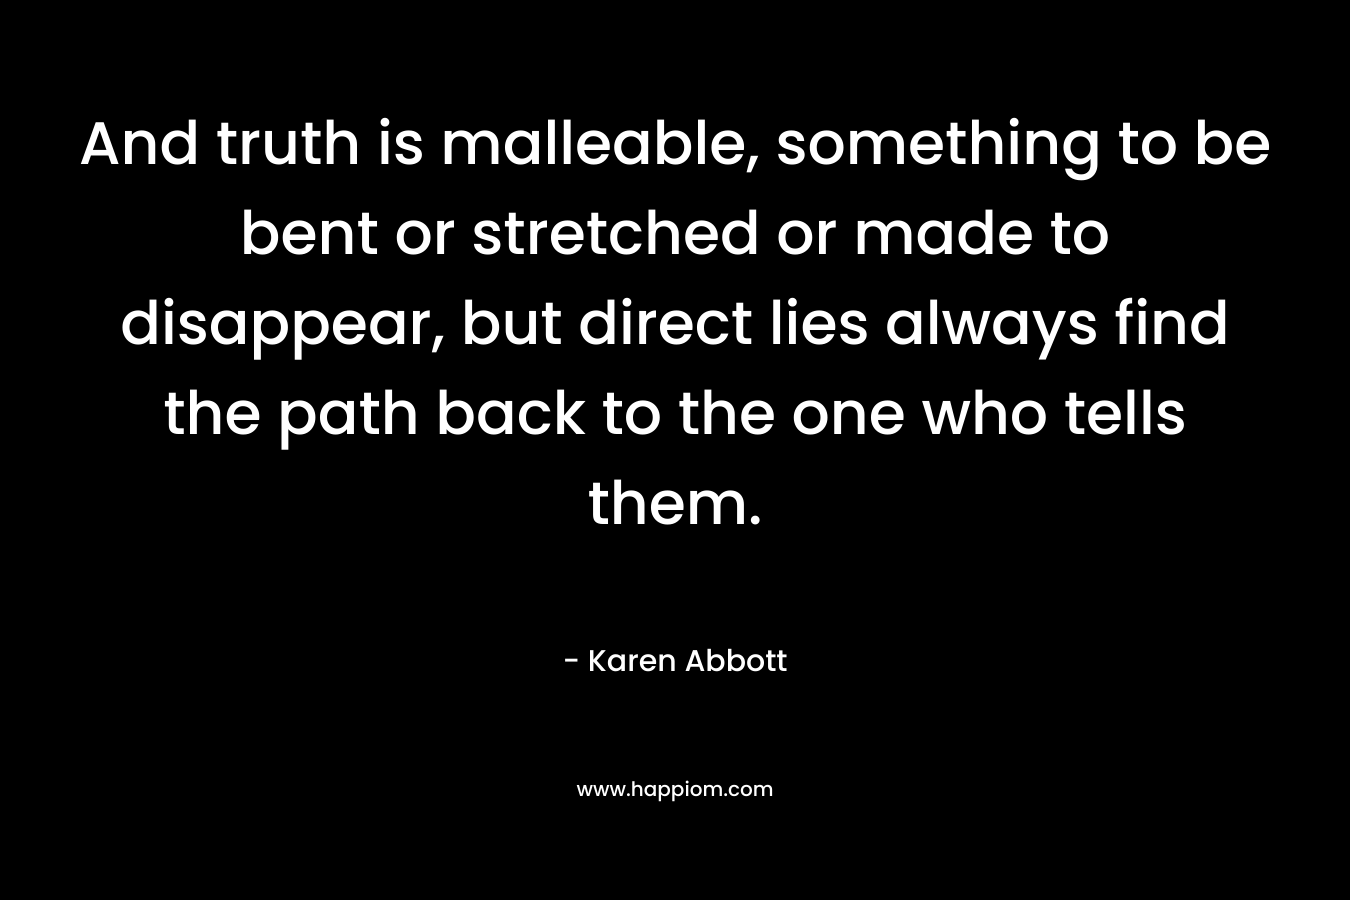 And truth is malleable, something to be bent or stretched or made to disappear, but direct lies always find the path back to the one who tells them.